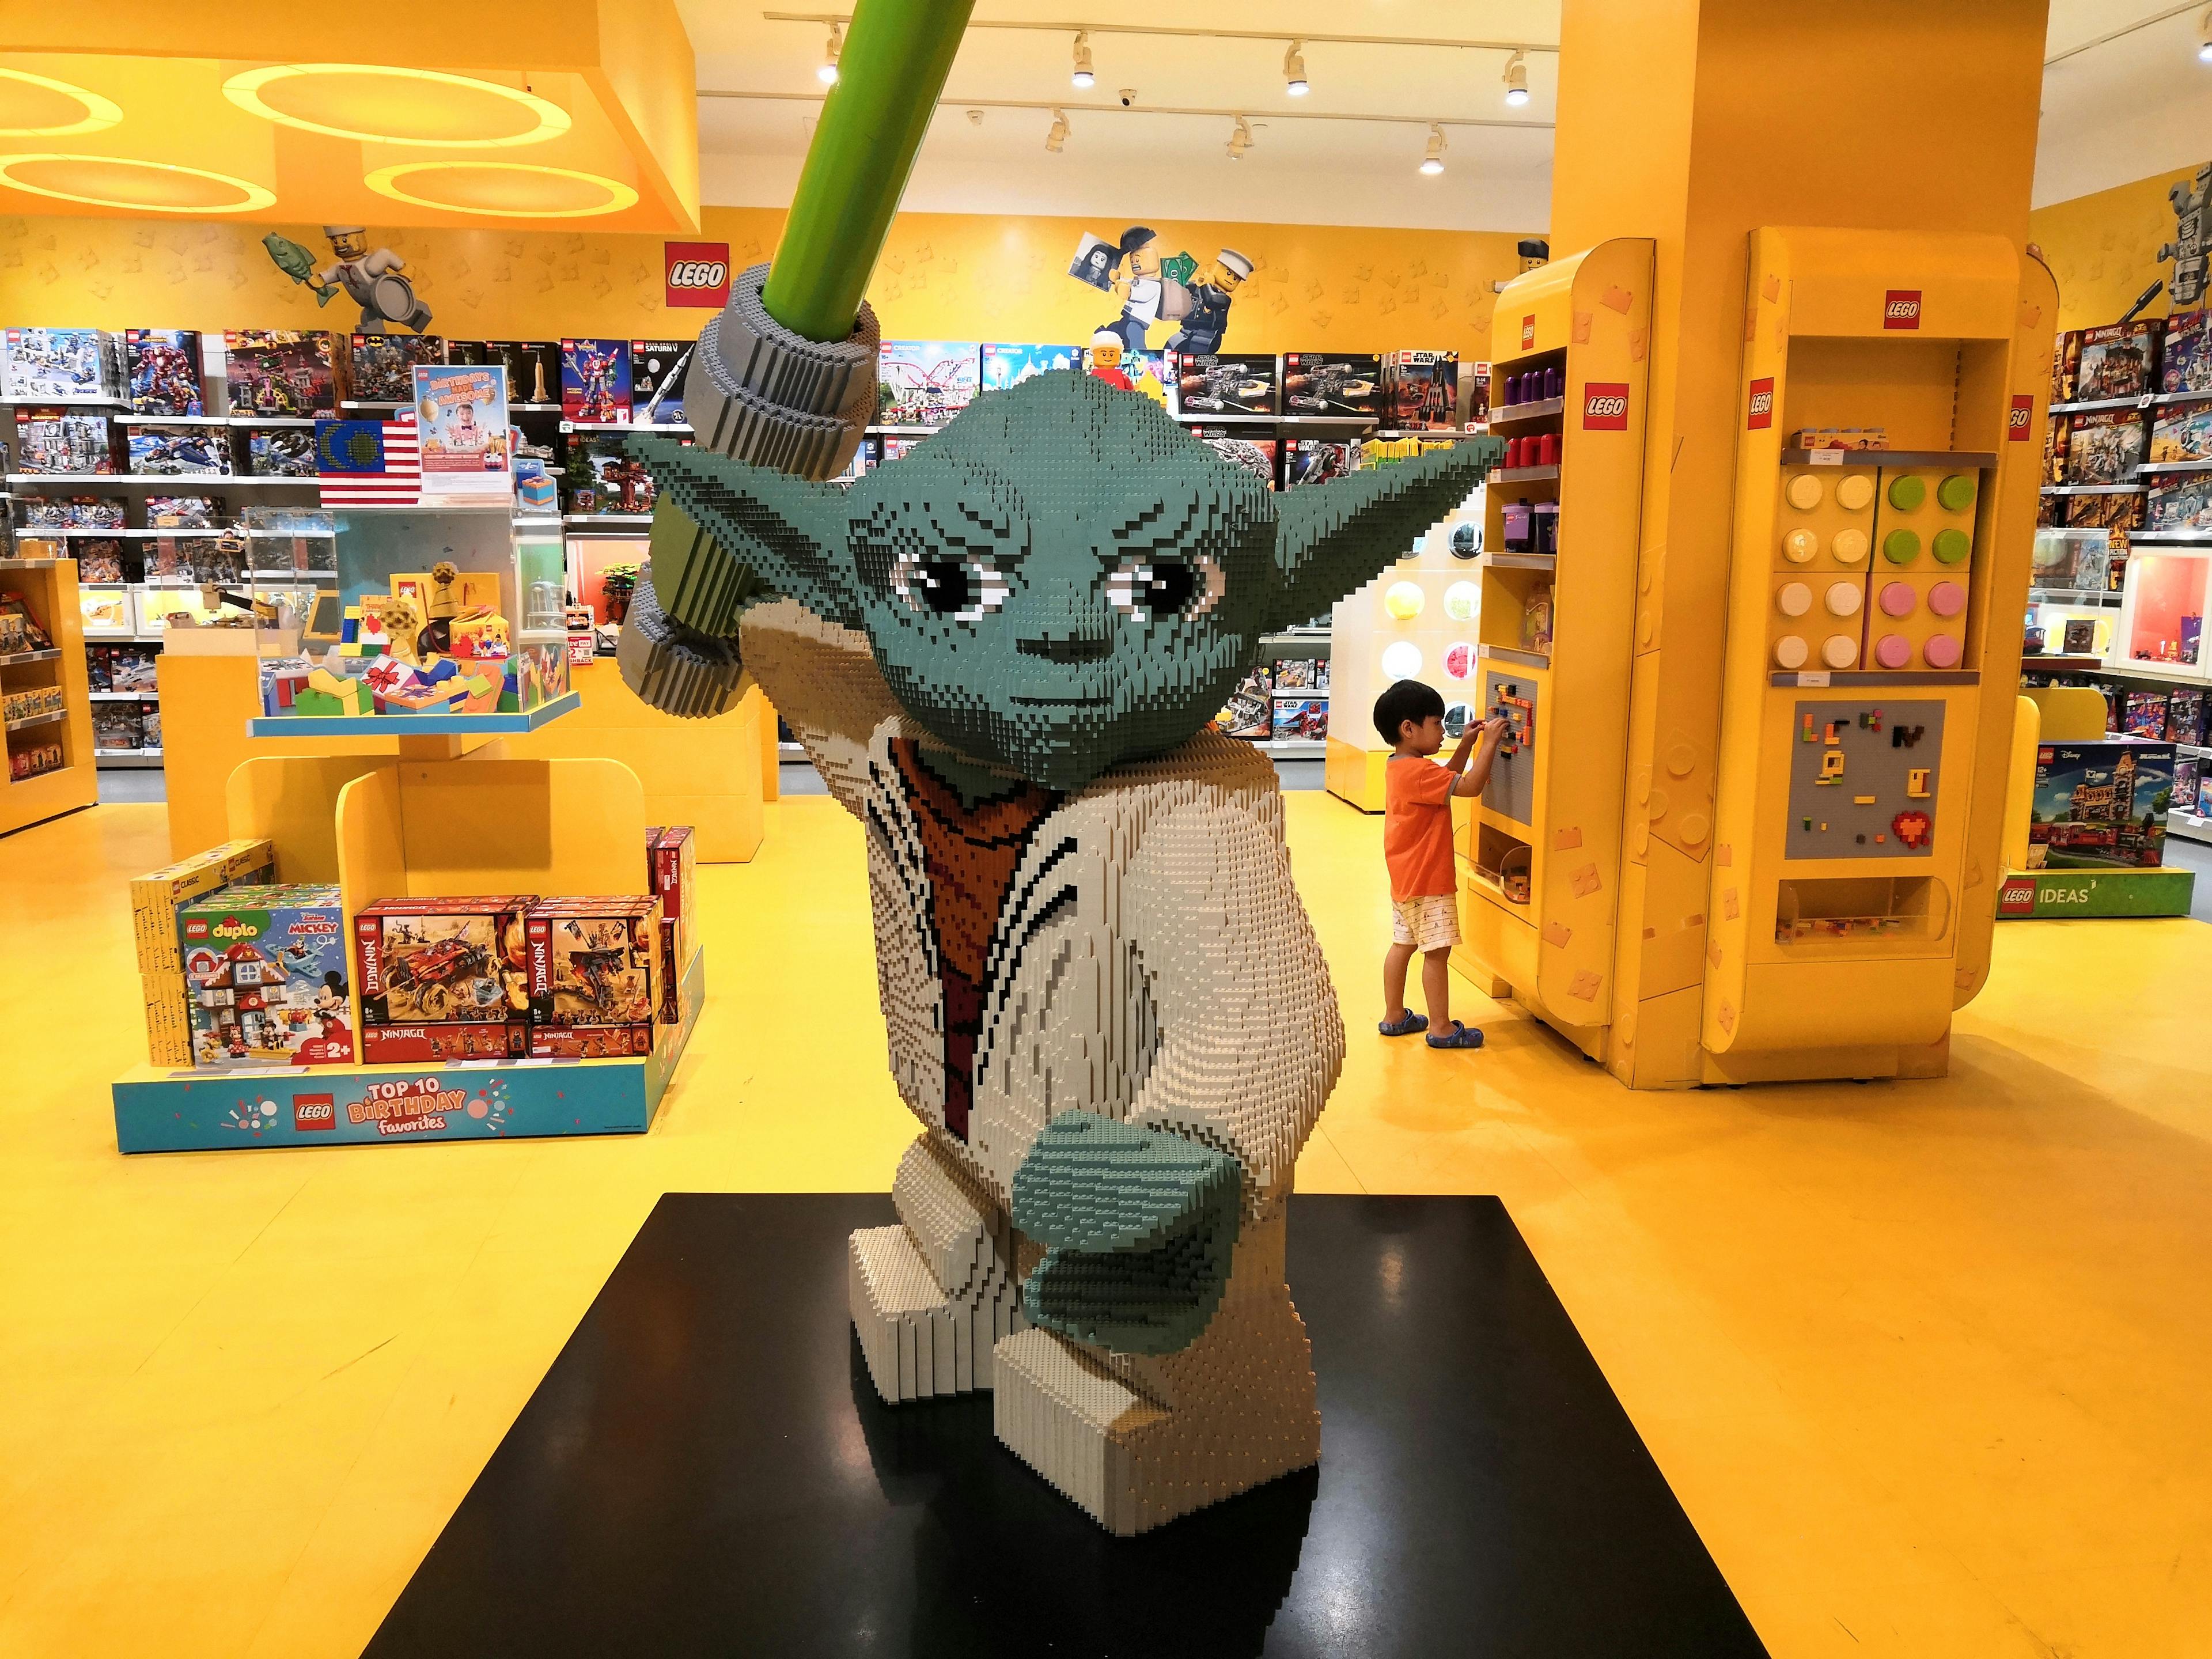 LEGO Yoda statue display in LEGO toy store at shopping mall